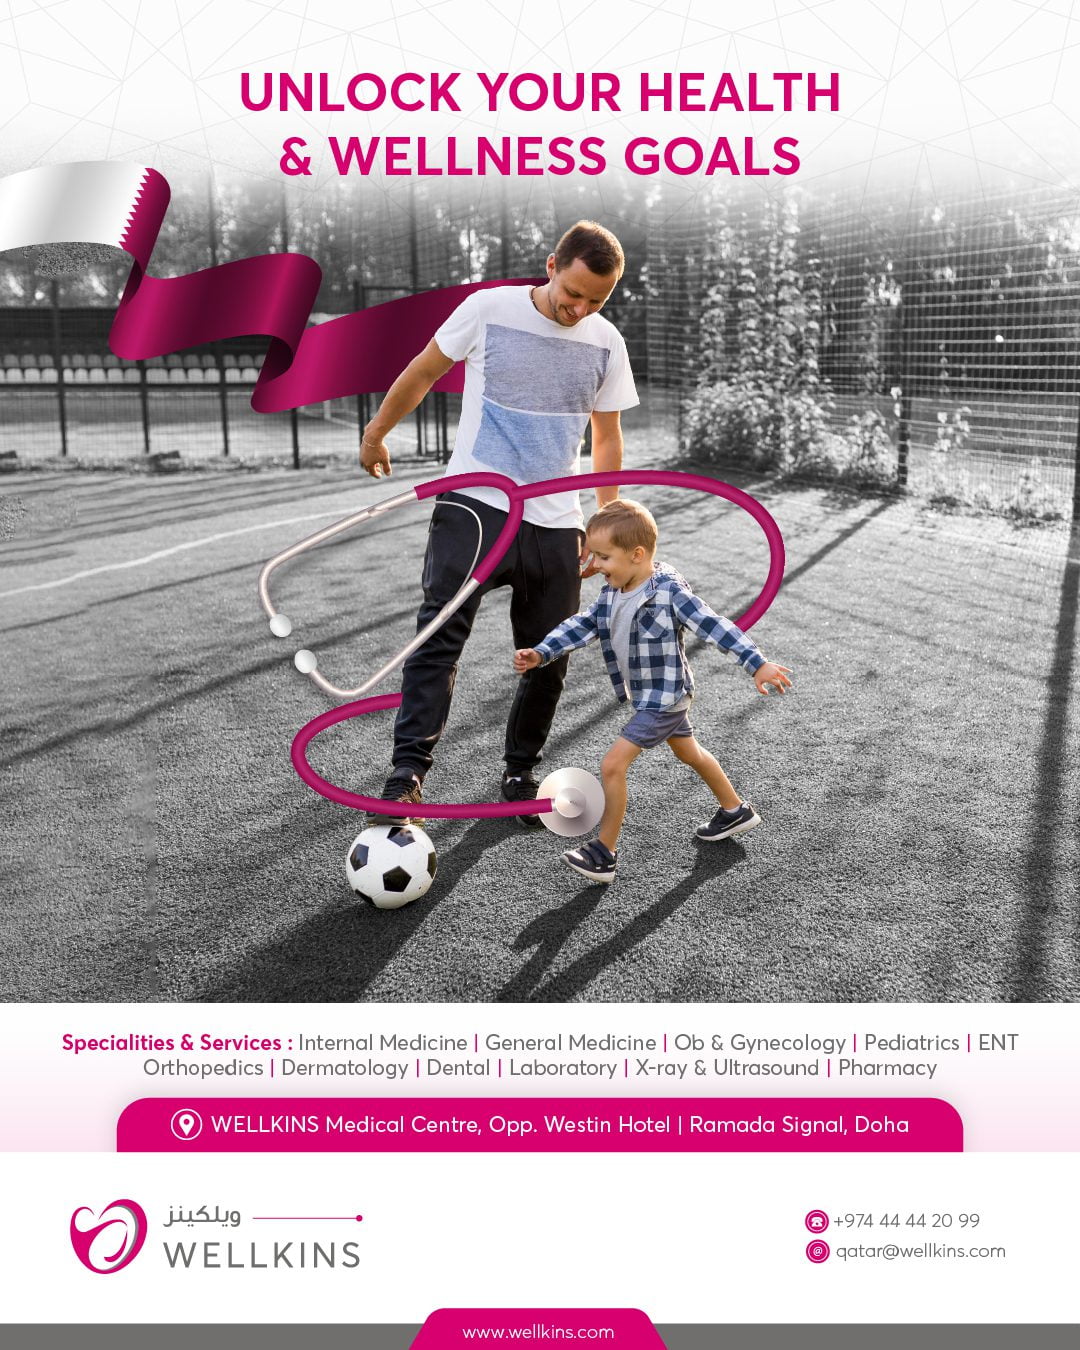 Unlock your health & wellness goals with WELLKINS Medical Centre, Opp. Westin Hotel, Ramada, Doha.
.
.
.
.
_______________________________
To learn more about #WELLKINSQATAR and our services, kindly visit our website www.wellkins.com
Helpline: 4444 2099
_______________________________
#Wellkinsqatar #wellkins #medicalcentre #Qatar2022